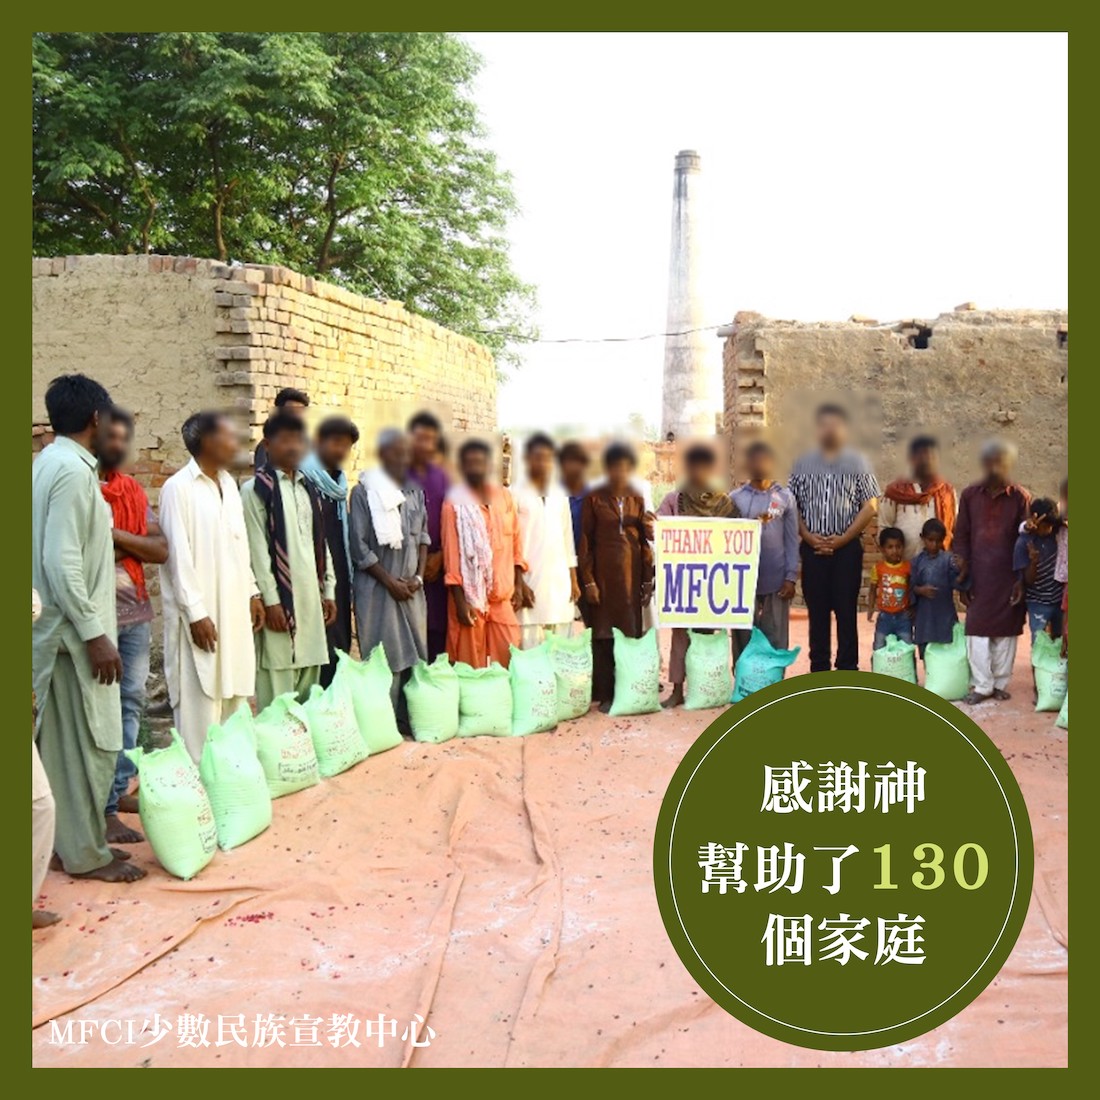 【Love and Care Relief Update】 Pakistan